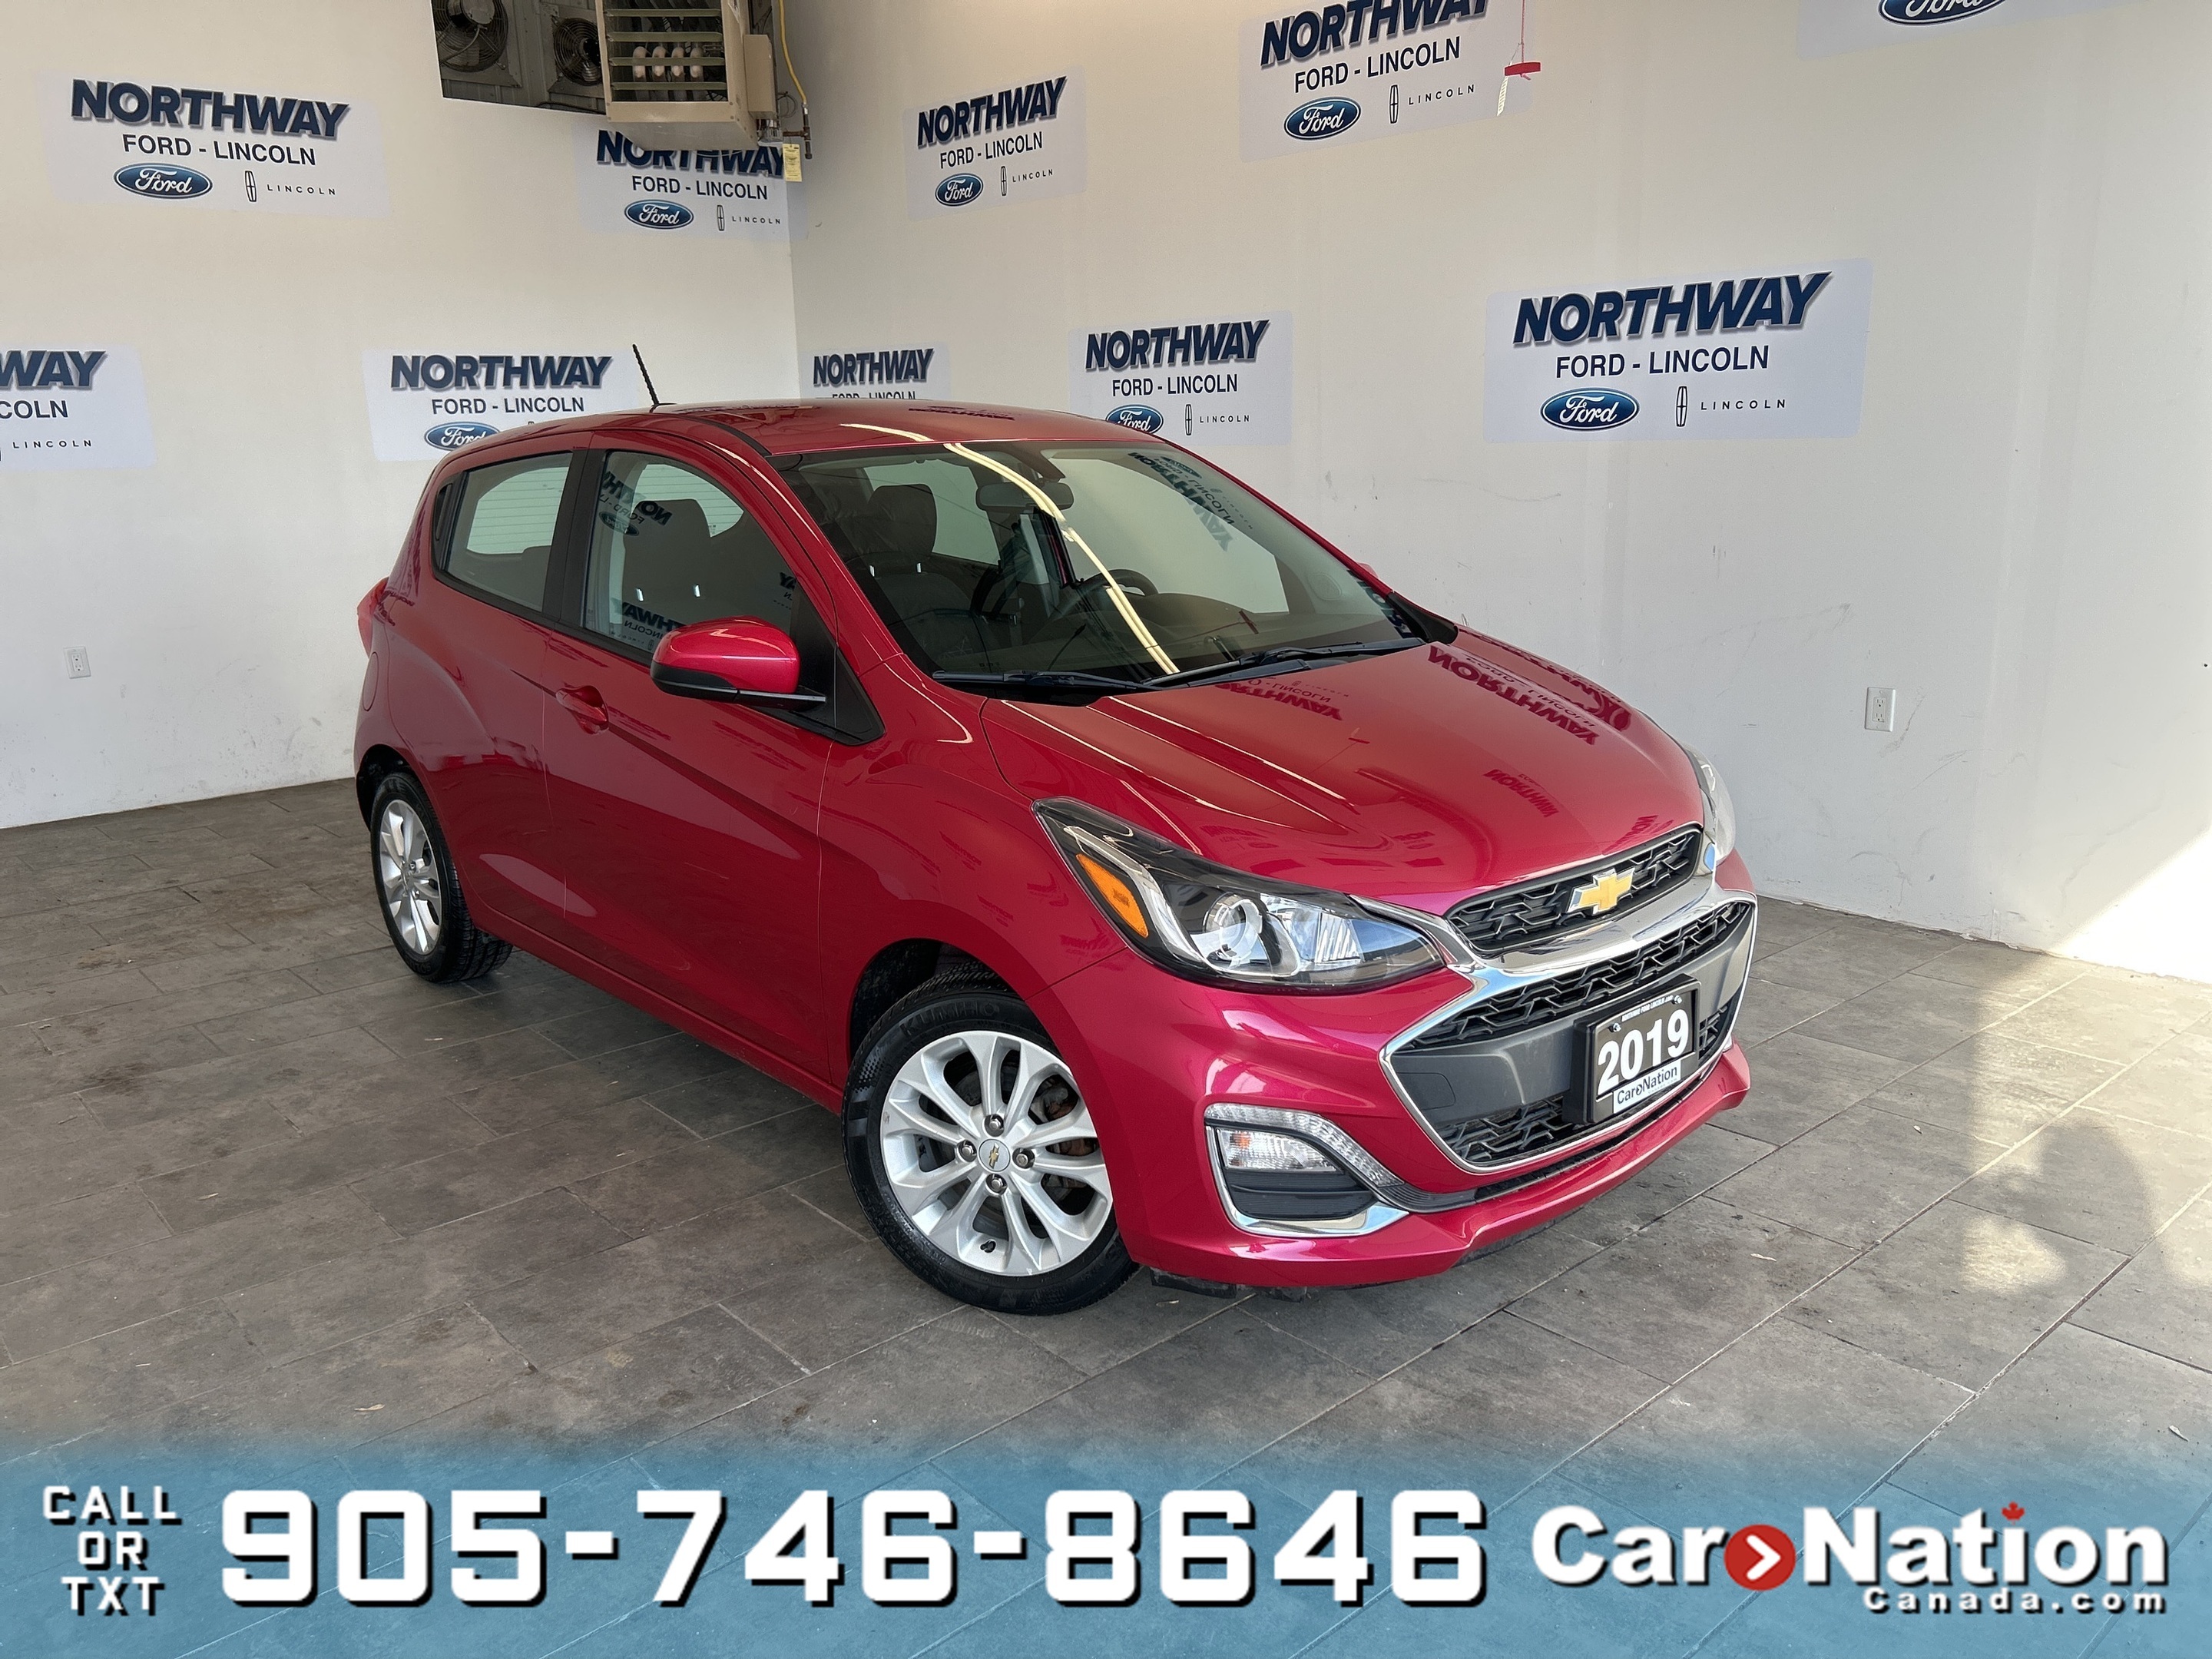 2019 Chevrolet Spark LT | HATCHBACK | TOUCHSCREEN | WE WANT YOUR TRADE!